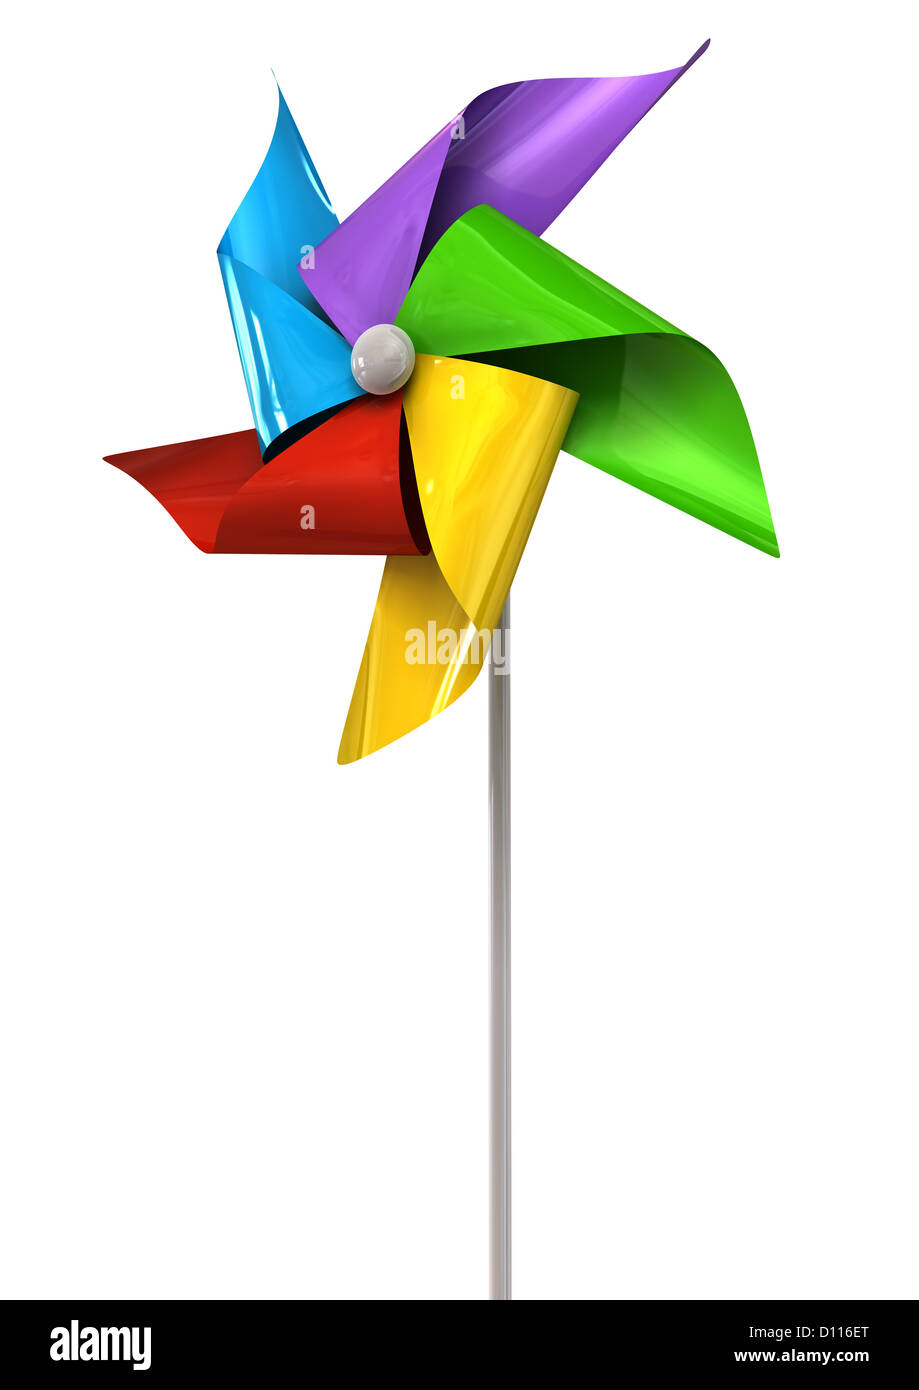 A perspective view of a regular toy pinwheel windmill with five differently colored vanes on a stick on an isolated background Stock Photo